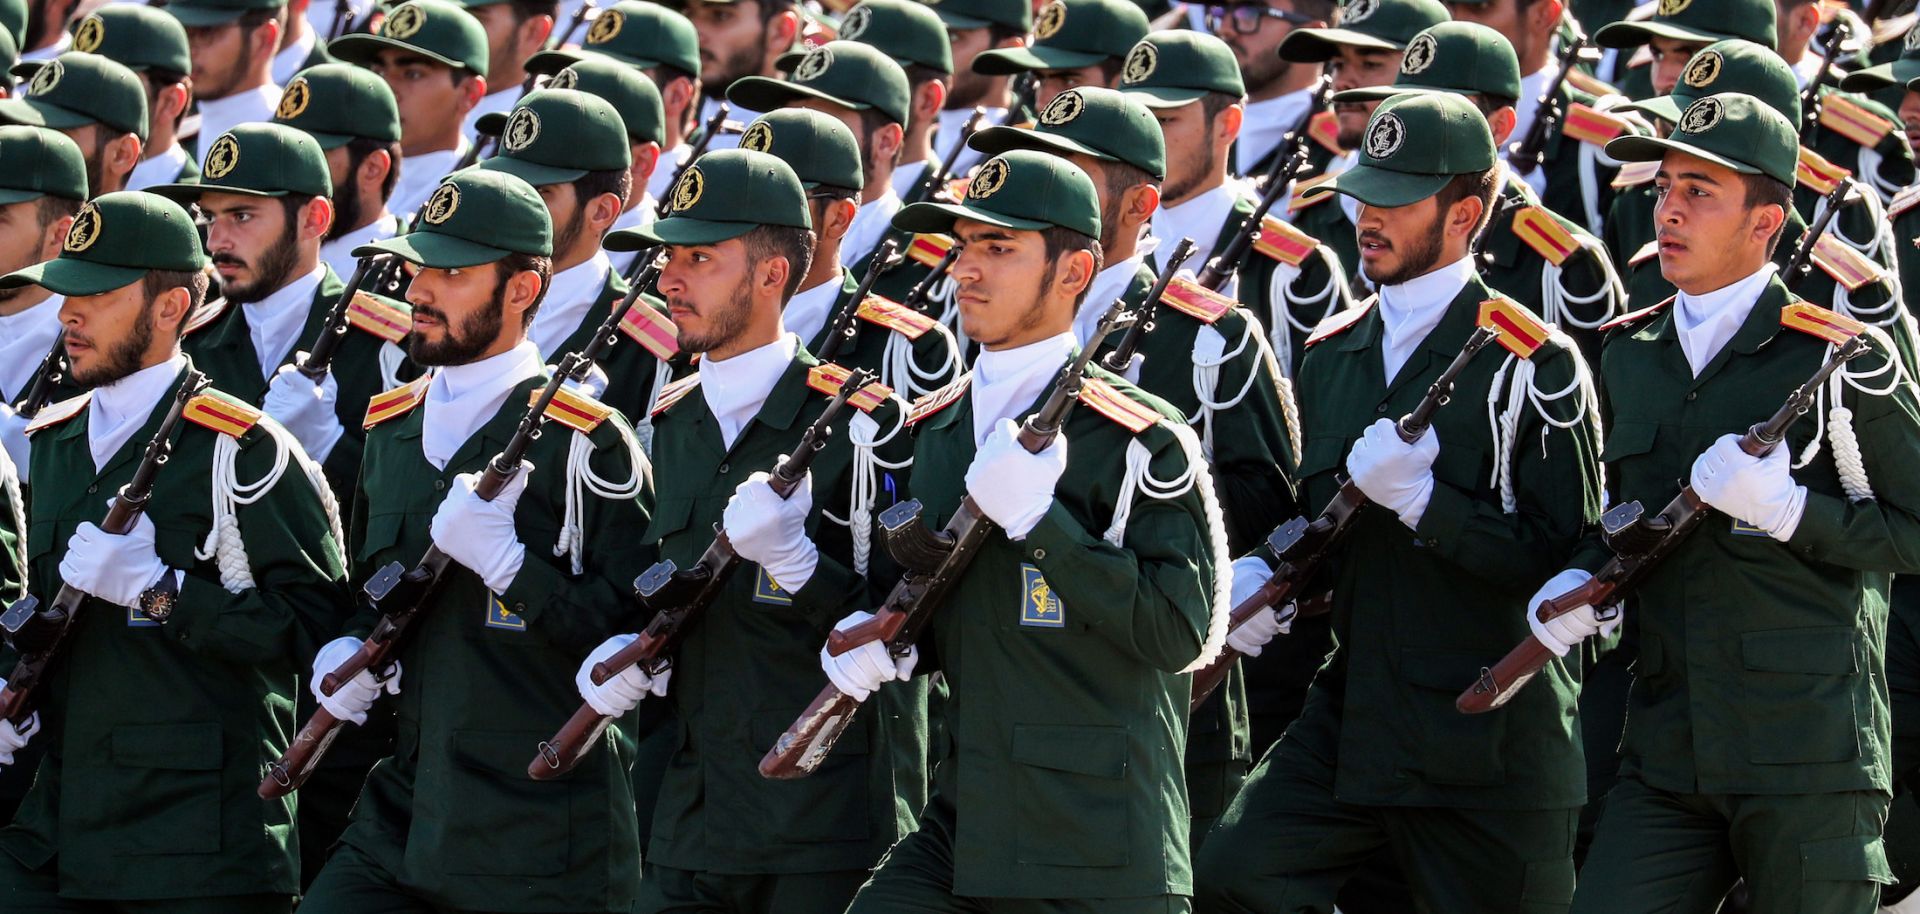 Members of the Islamic Revolutionary Guard Corps are seen on Sept. 22, 2018, in the Iranian capital of Tehran.